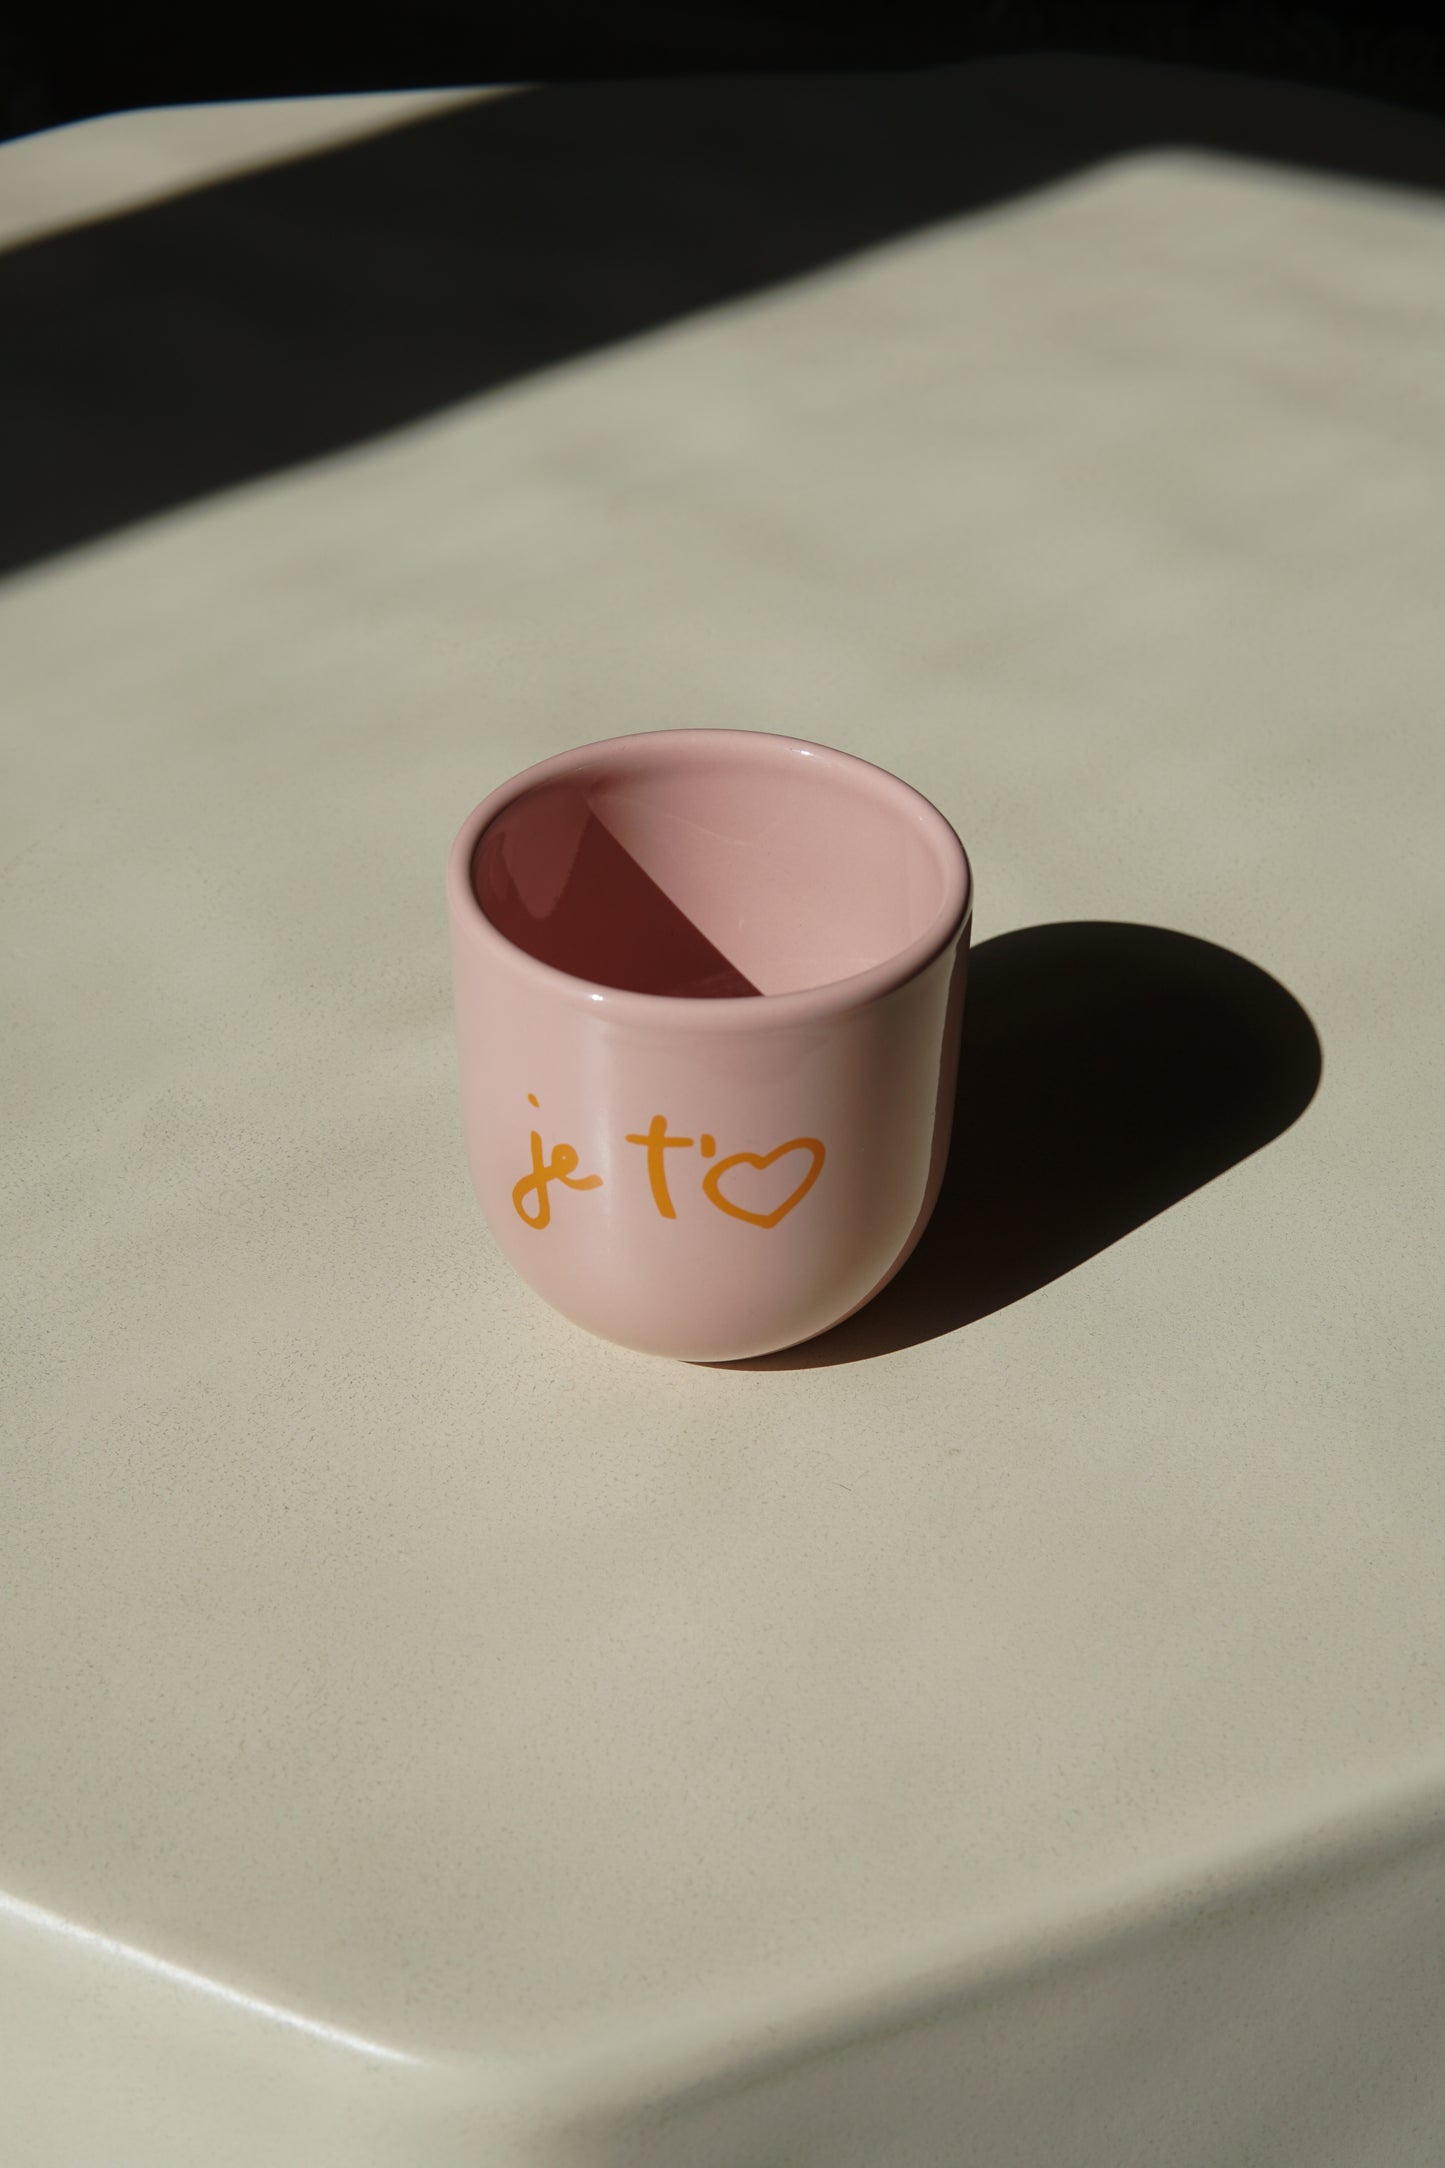 Sisi cup, Je t'eam pink